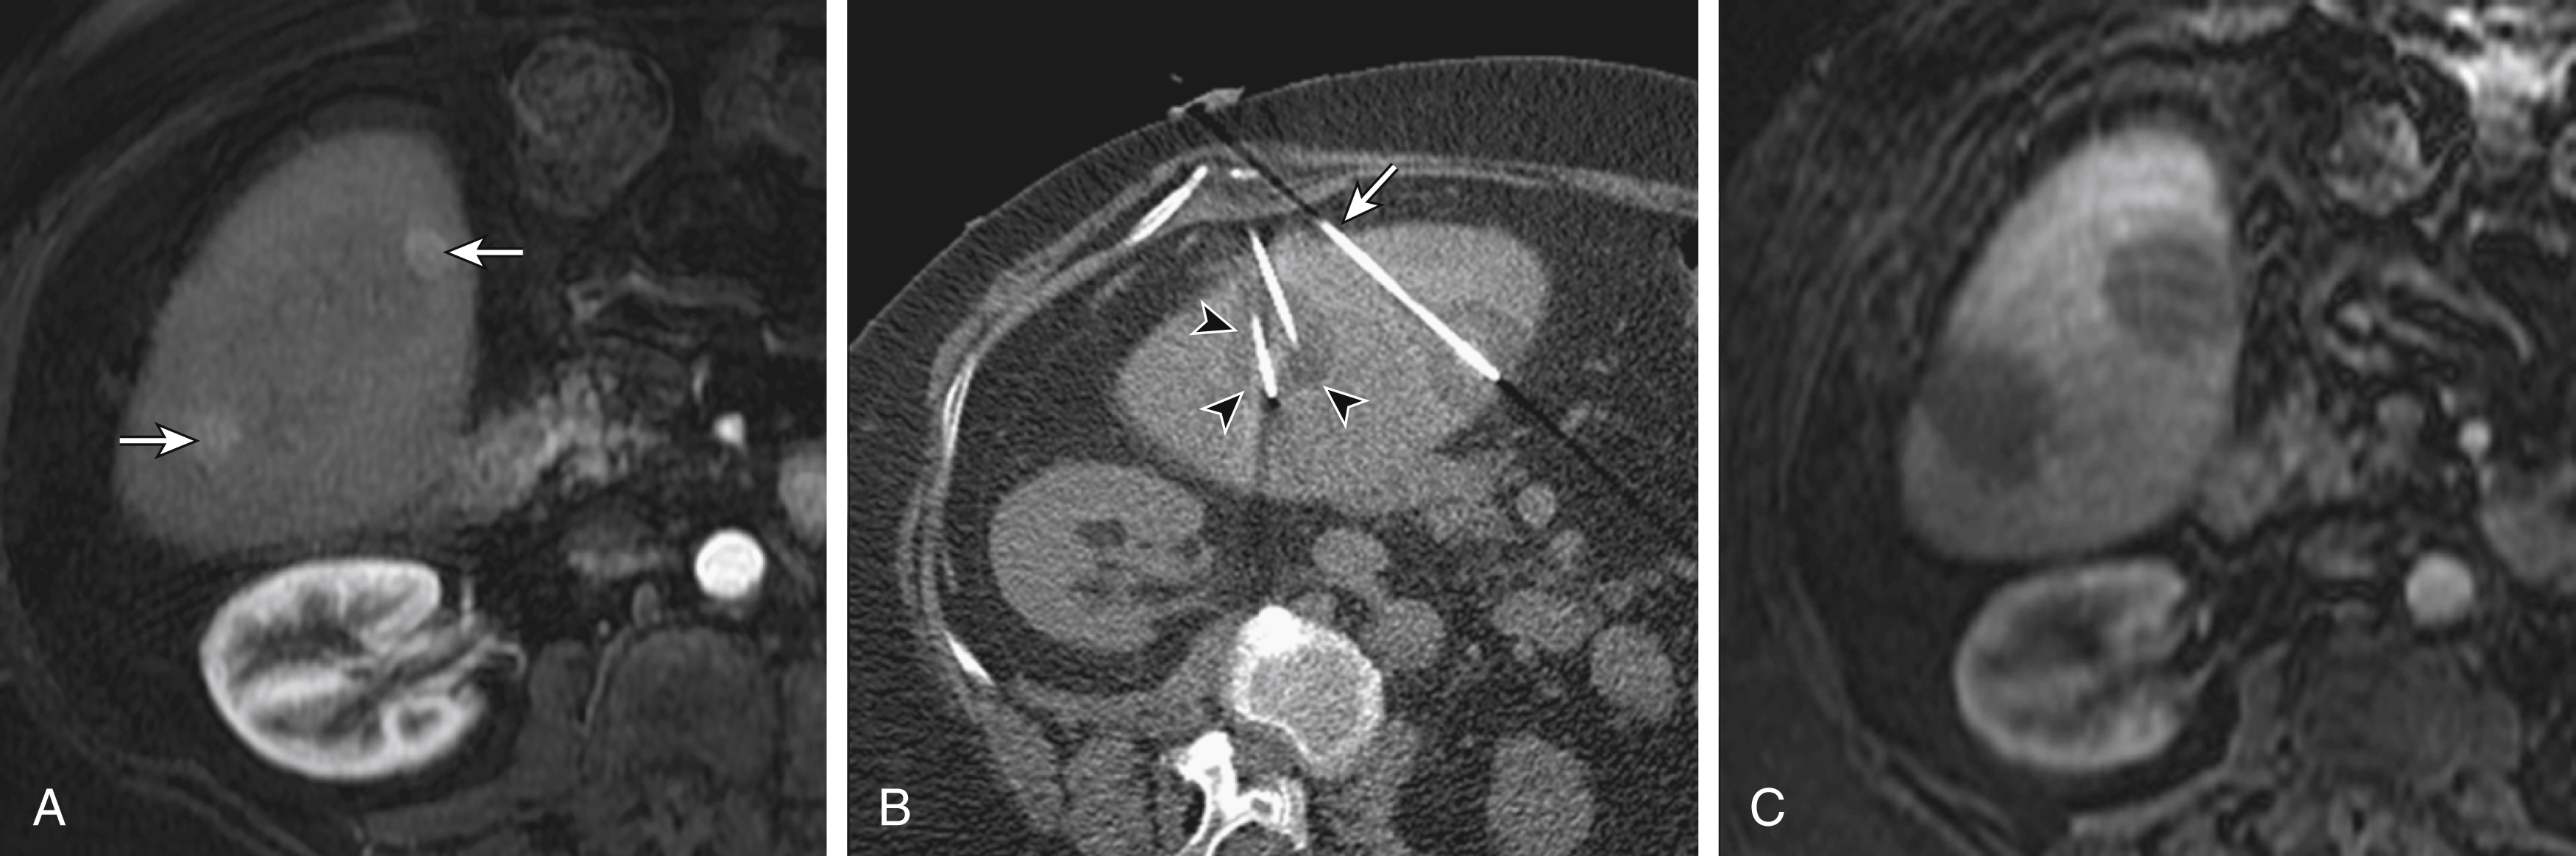 Fig. 98.5, Image-guided cryoablation. (A) Axial contrast-enhanced magnetic resonance image (MRI) identifies two enhancing liver metastases ( arrows ). (B) Unenhanced axial computed tomography (CT) scan shows cryoprobes ( arrow ) placed under CT guidance. The iceball appears as a hypodense rounded shape ( arrowheads ) around the probes. (C) Axial contrast-enhanced postprocedure MRI at 24 hours shows the corresponding nonenhancing regions of ablation covering the tumors, suggesting complete destruction of the metastases.